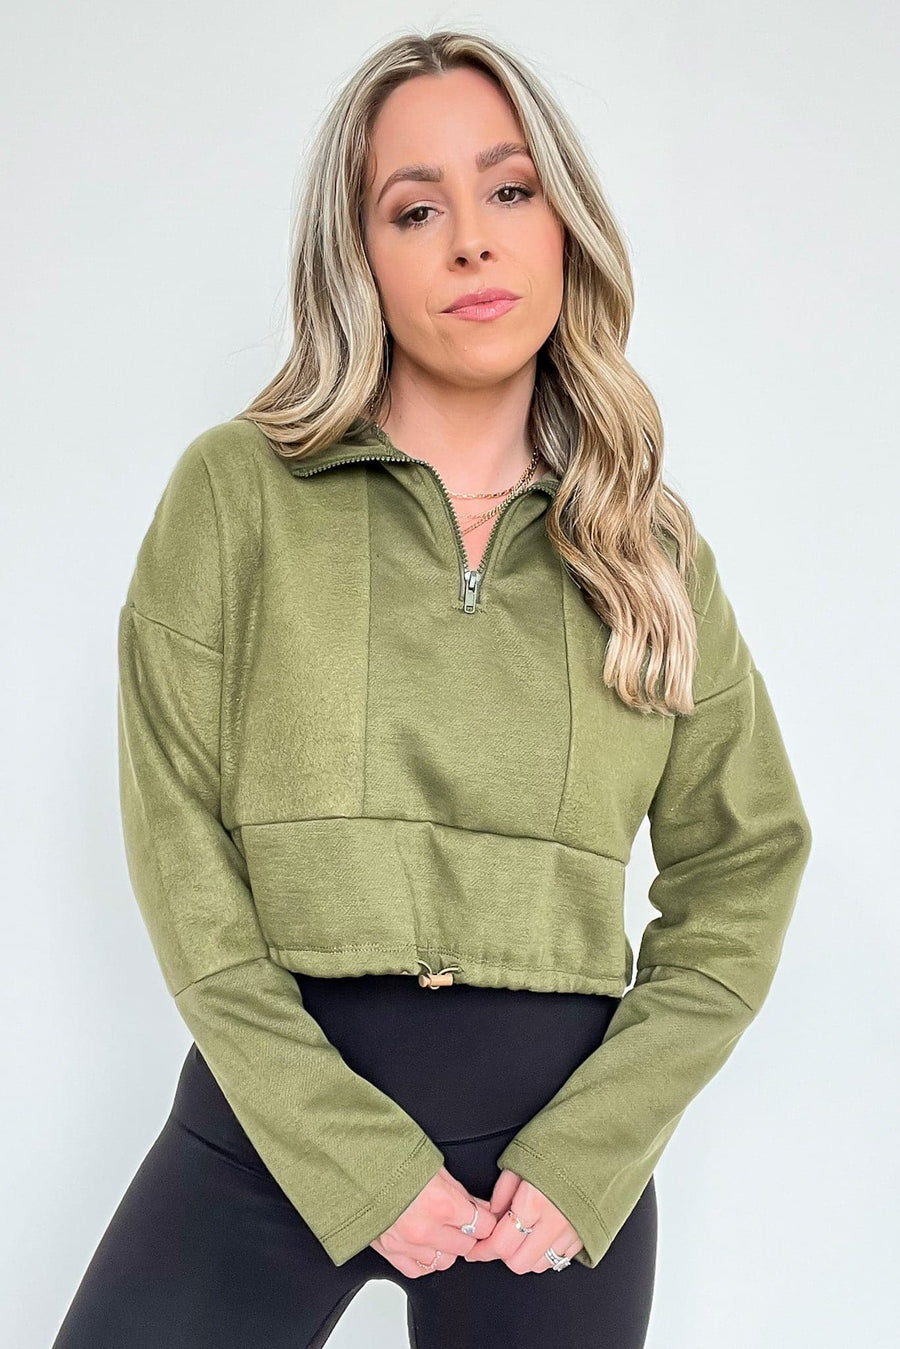 Olive / XS Cyndellah Long Sleeve 1/4 Zip Cropped Pullover - kitchencabinetmagic